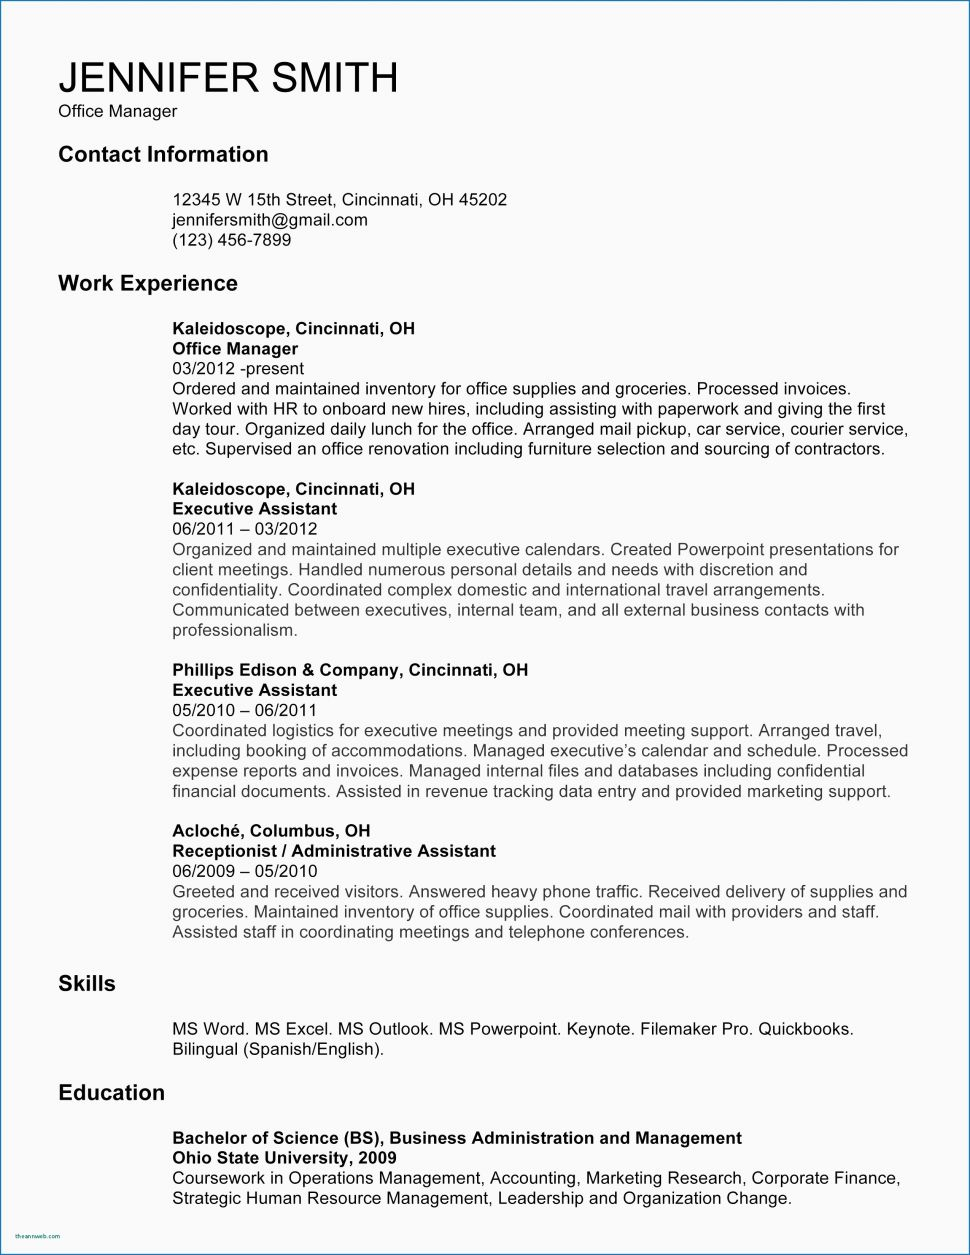 Professional Profile Resume Example  Hairstyles Master Of Business Administration Resume Scenic